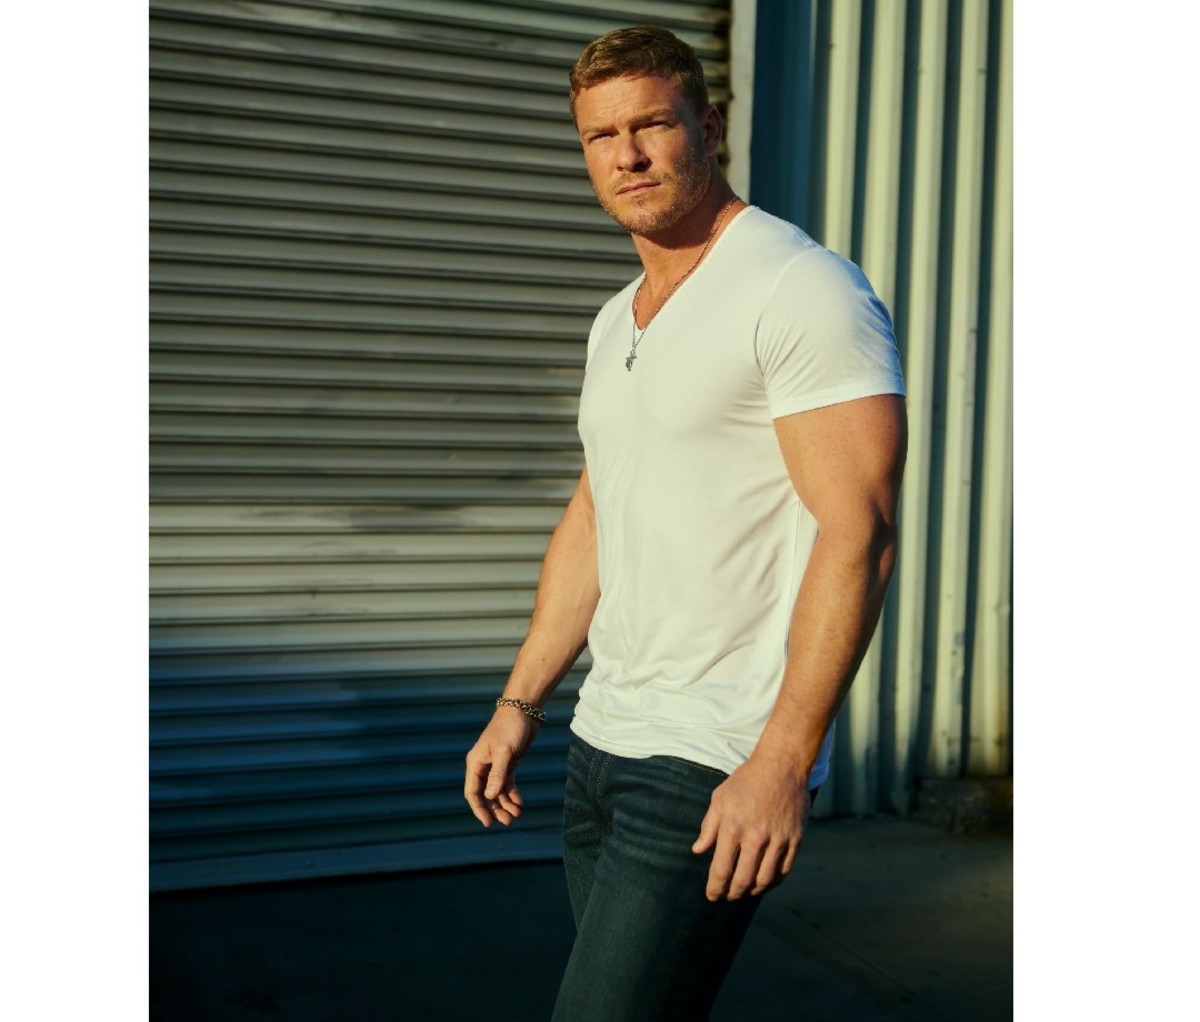 Actor Alan Ritchson stands outside in a white t-shirt during a scene from Amazon's "Reacher"